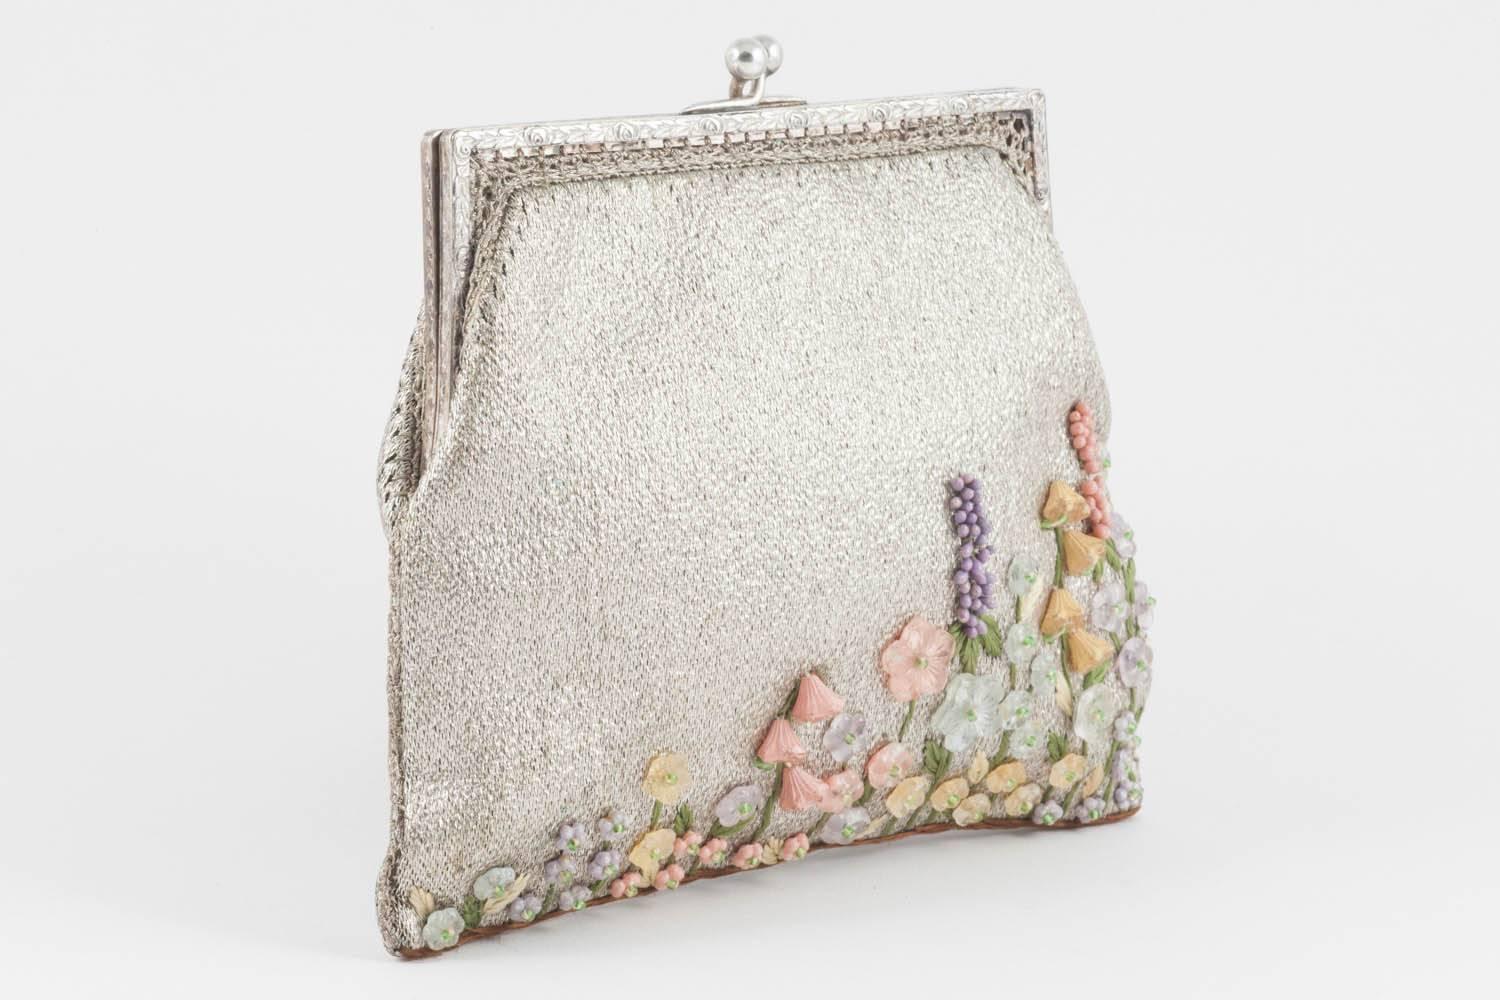 Women's Exquisite silver clutch, with hand painted flower decoration, 1920s